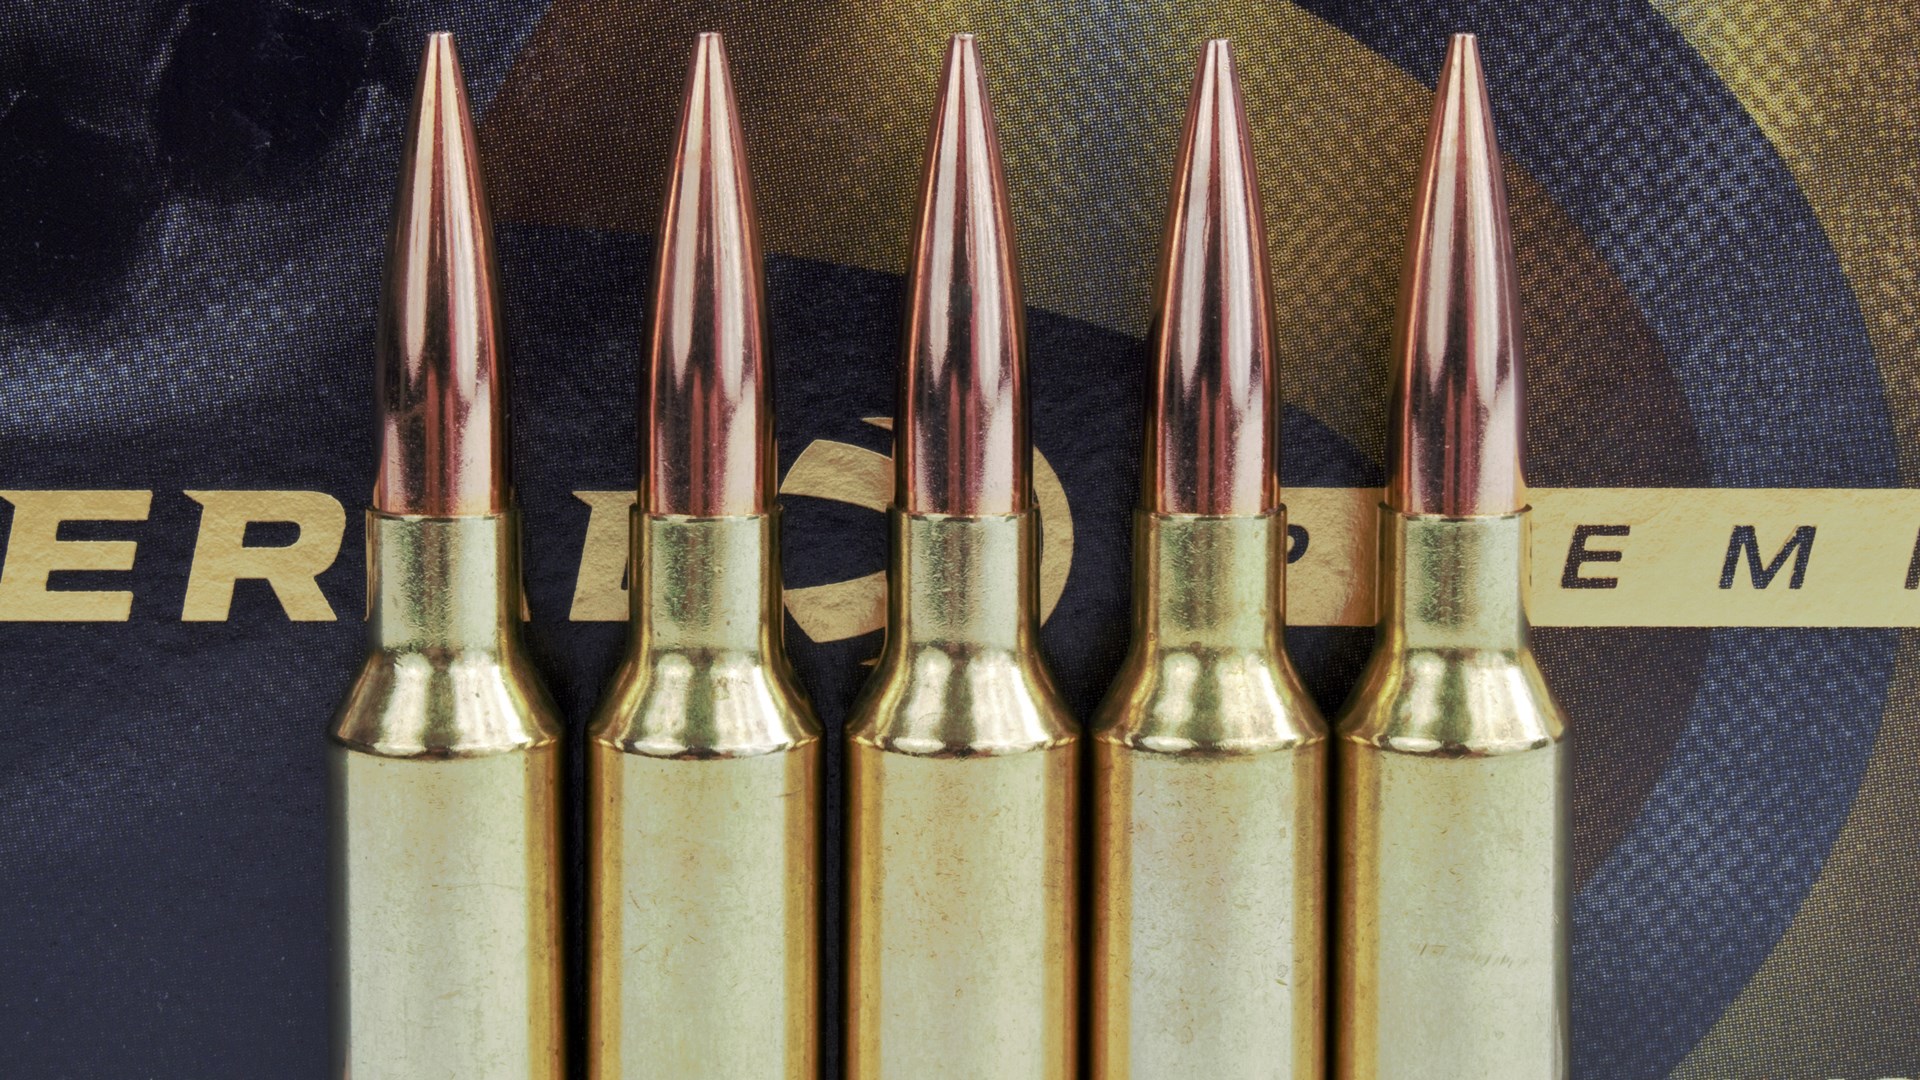 6.5 mm Creedmoor bullets cartridges upright stack arrangement left to right picket fence five pieces brass ammunition box federal premium